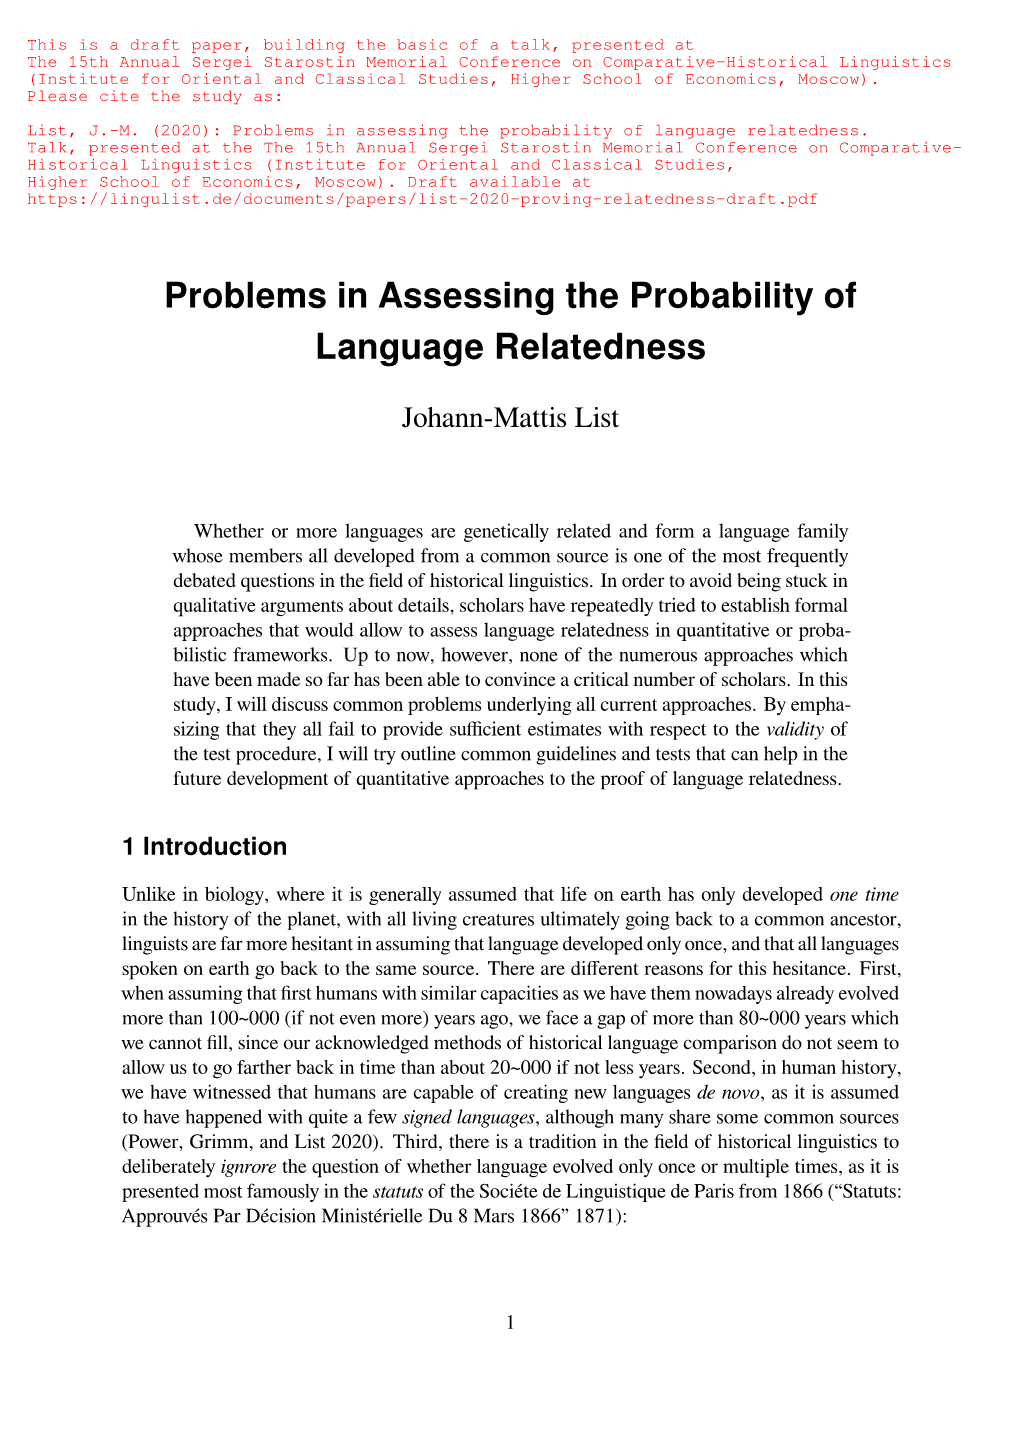 Problems in Assessing the Probability of Language Relatedness